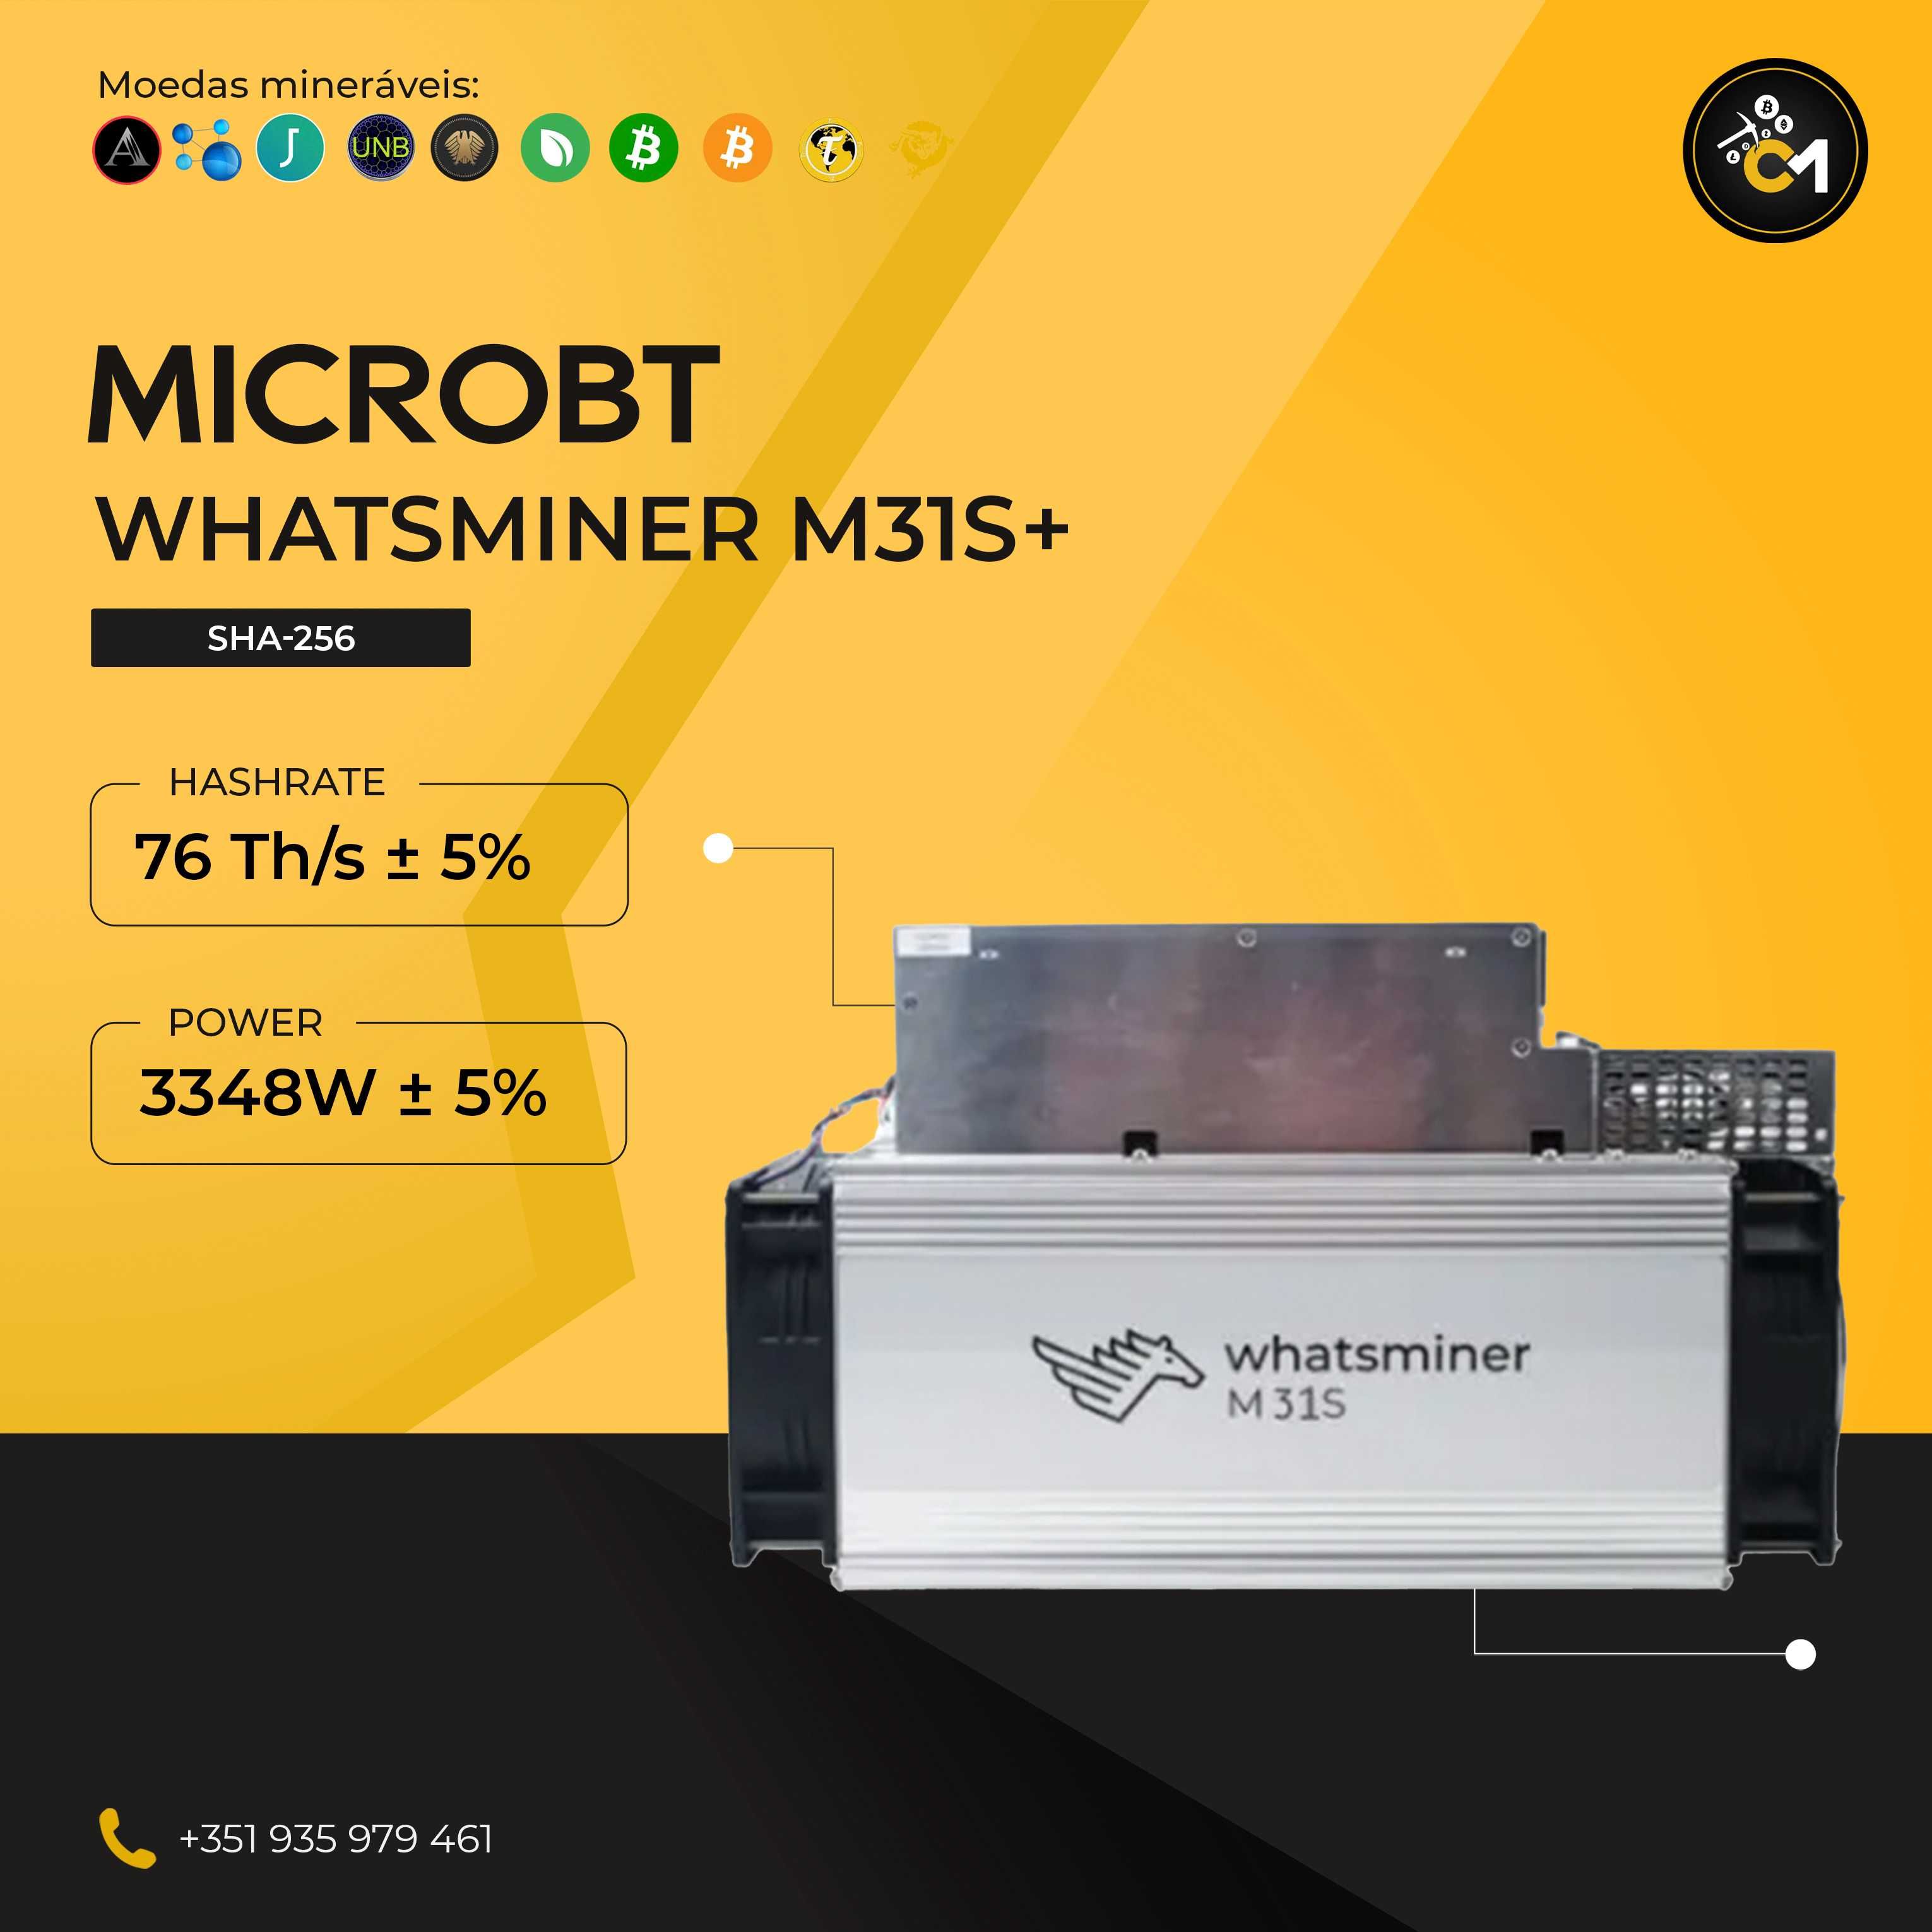 MicroBT Whatsminer M31S+ 76 Th/s